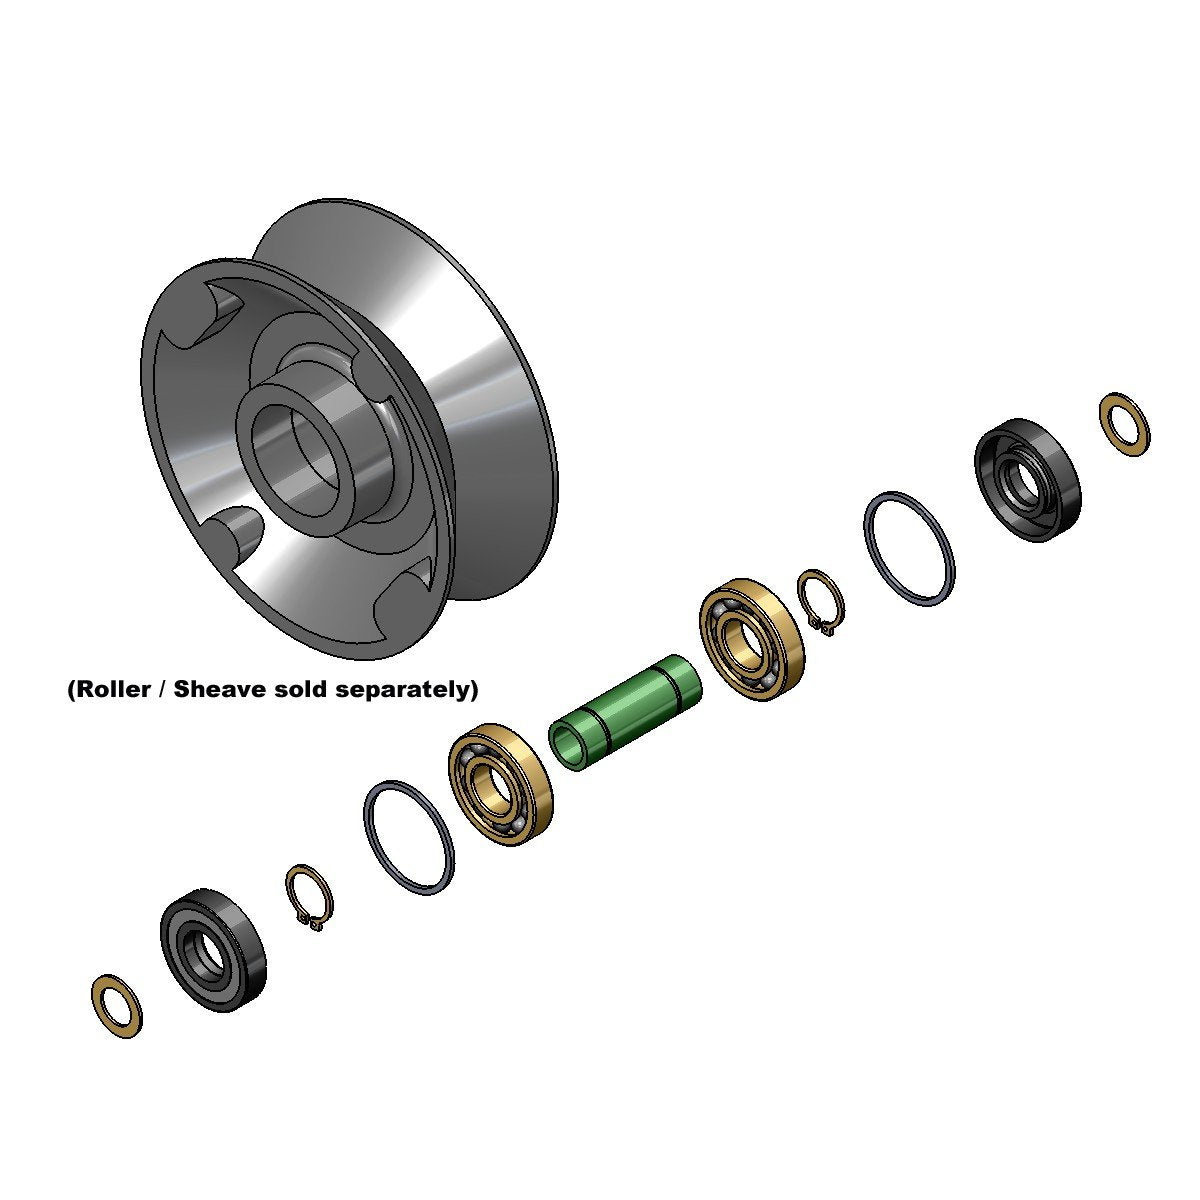 LP 4" HT Block Bearing Service Kit. Kit Includes: 2 - bearings, 2 - seals, 2 - snap rings, 2 - shim washers, 2 - spacers, 1 - shaft spacer, 1 - tube “Viperlube”. Sold individually.